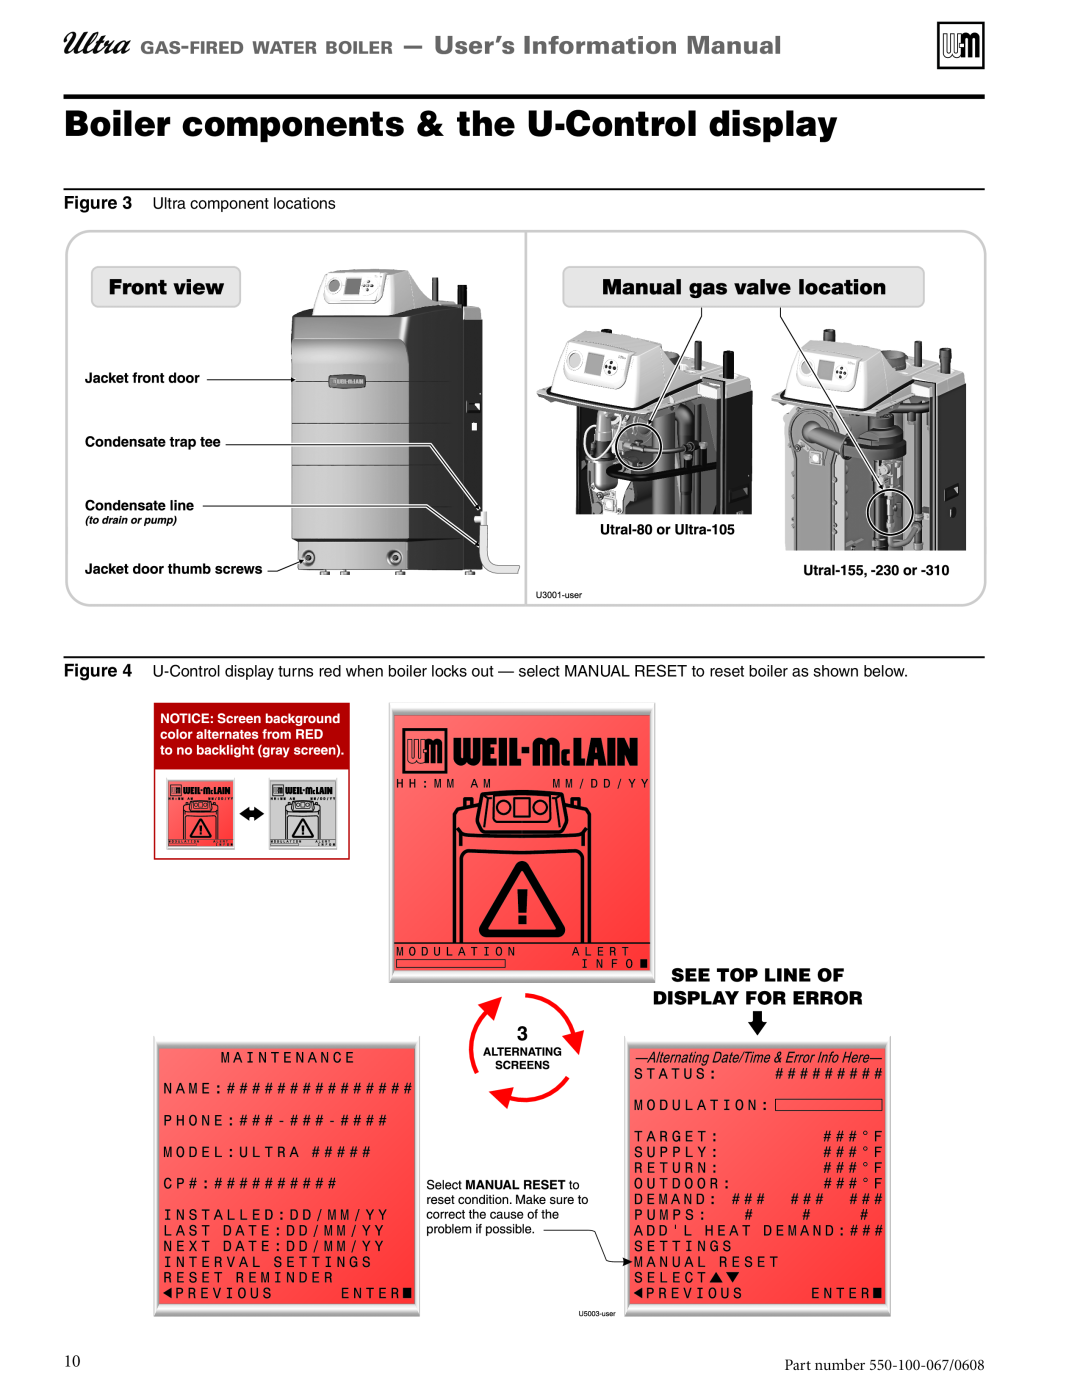 Weil-McLain 550-100-067/0608 Boiler components & the U-Controldisplay, gas-firedwater boiler - User’s Information Manual 